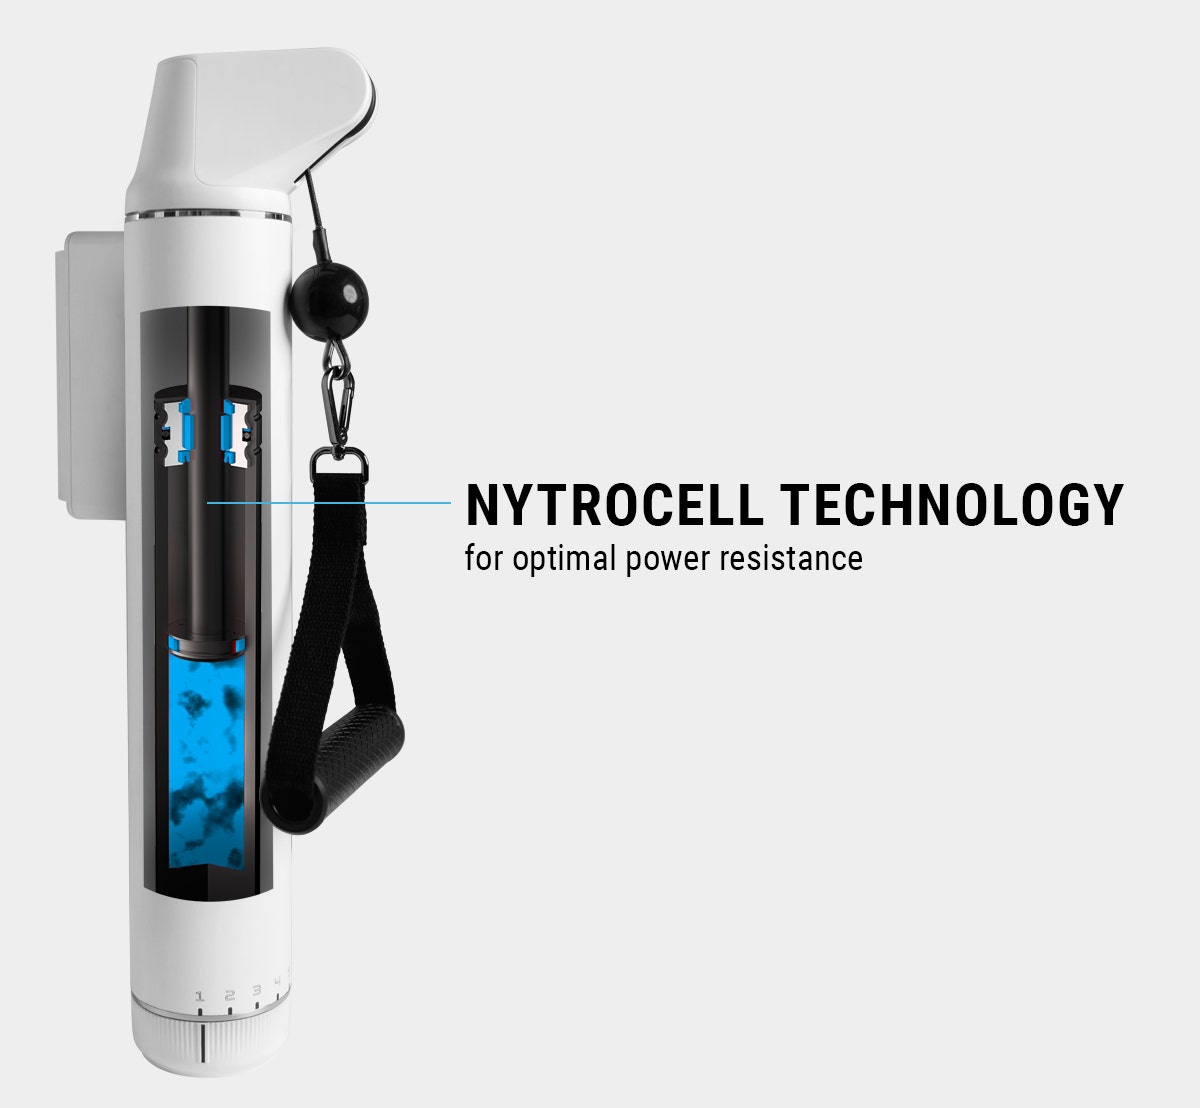 Nytrocell traction technology